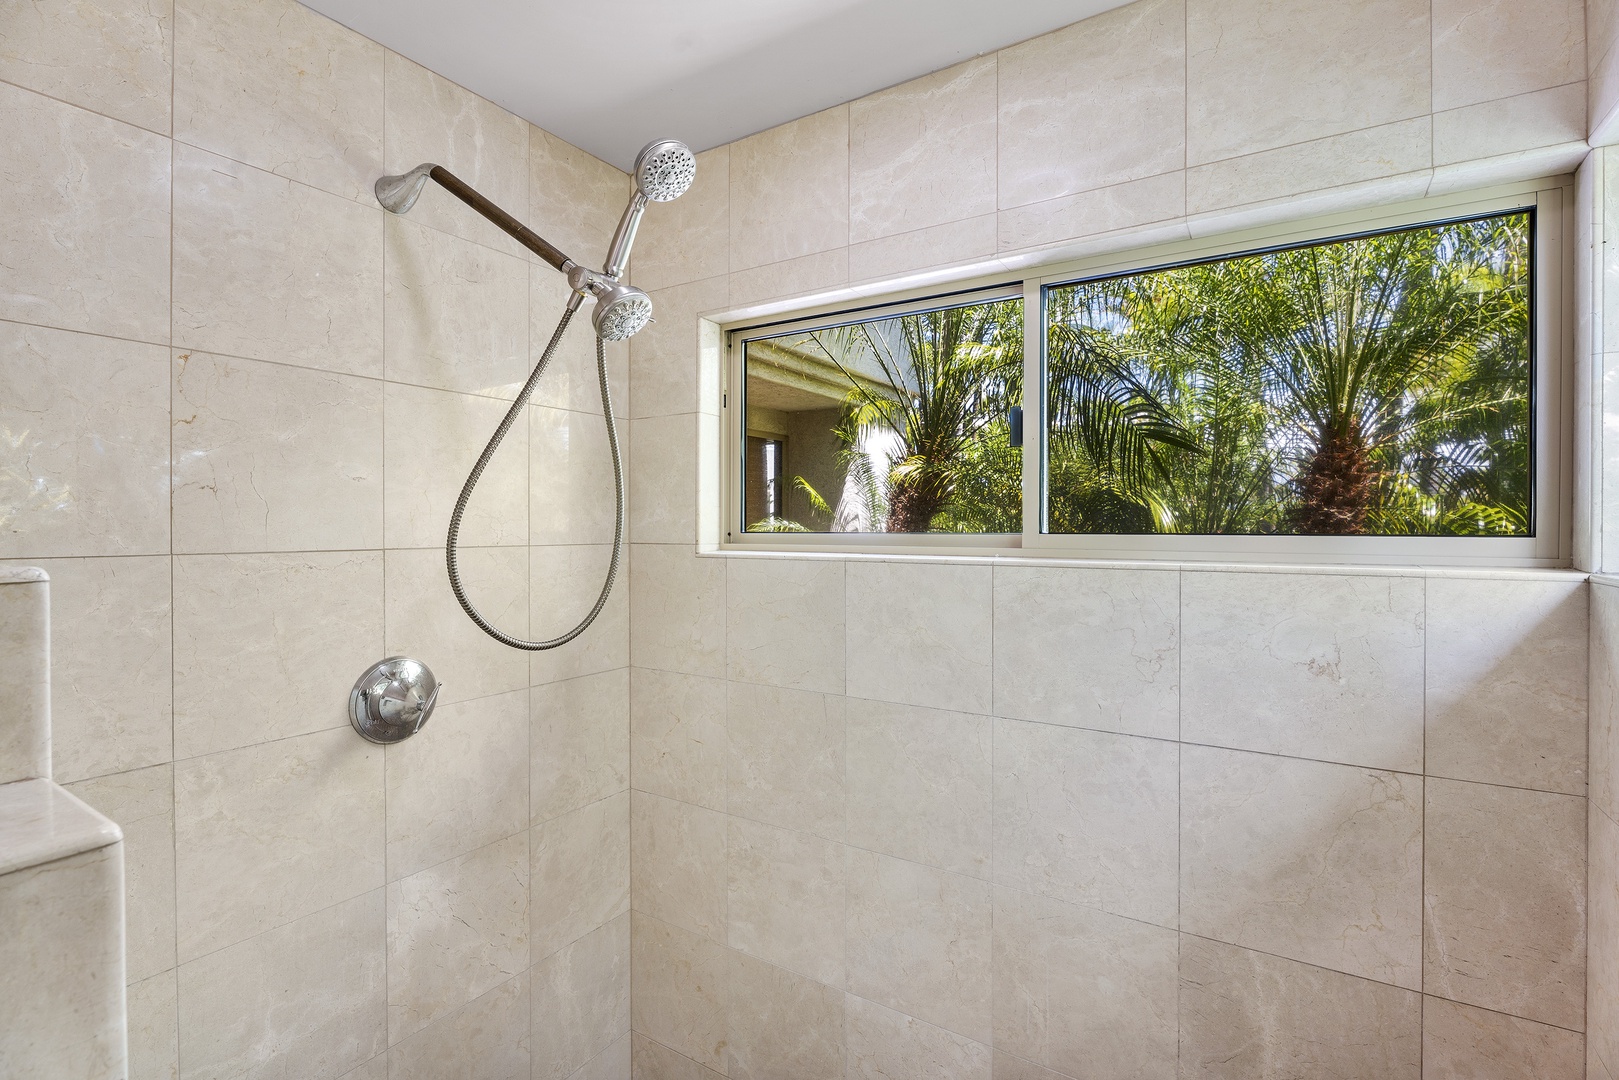 Kamuela Vacation Rentals, Champion Ridge #35 - Walk in shower within the attached ensuite